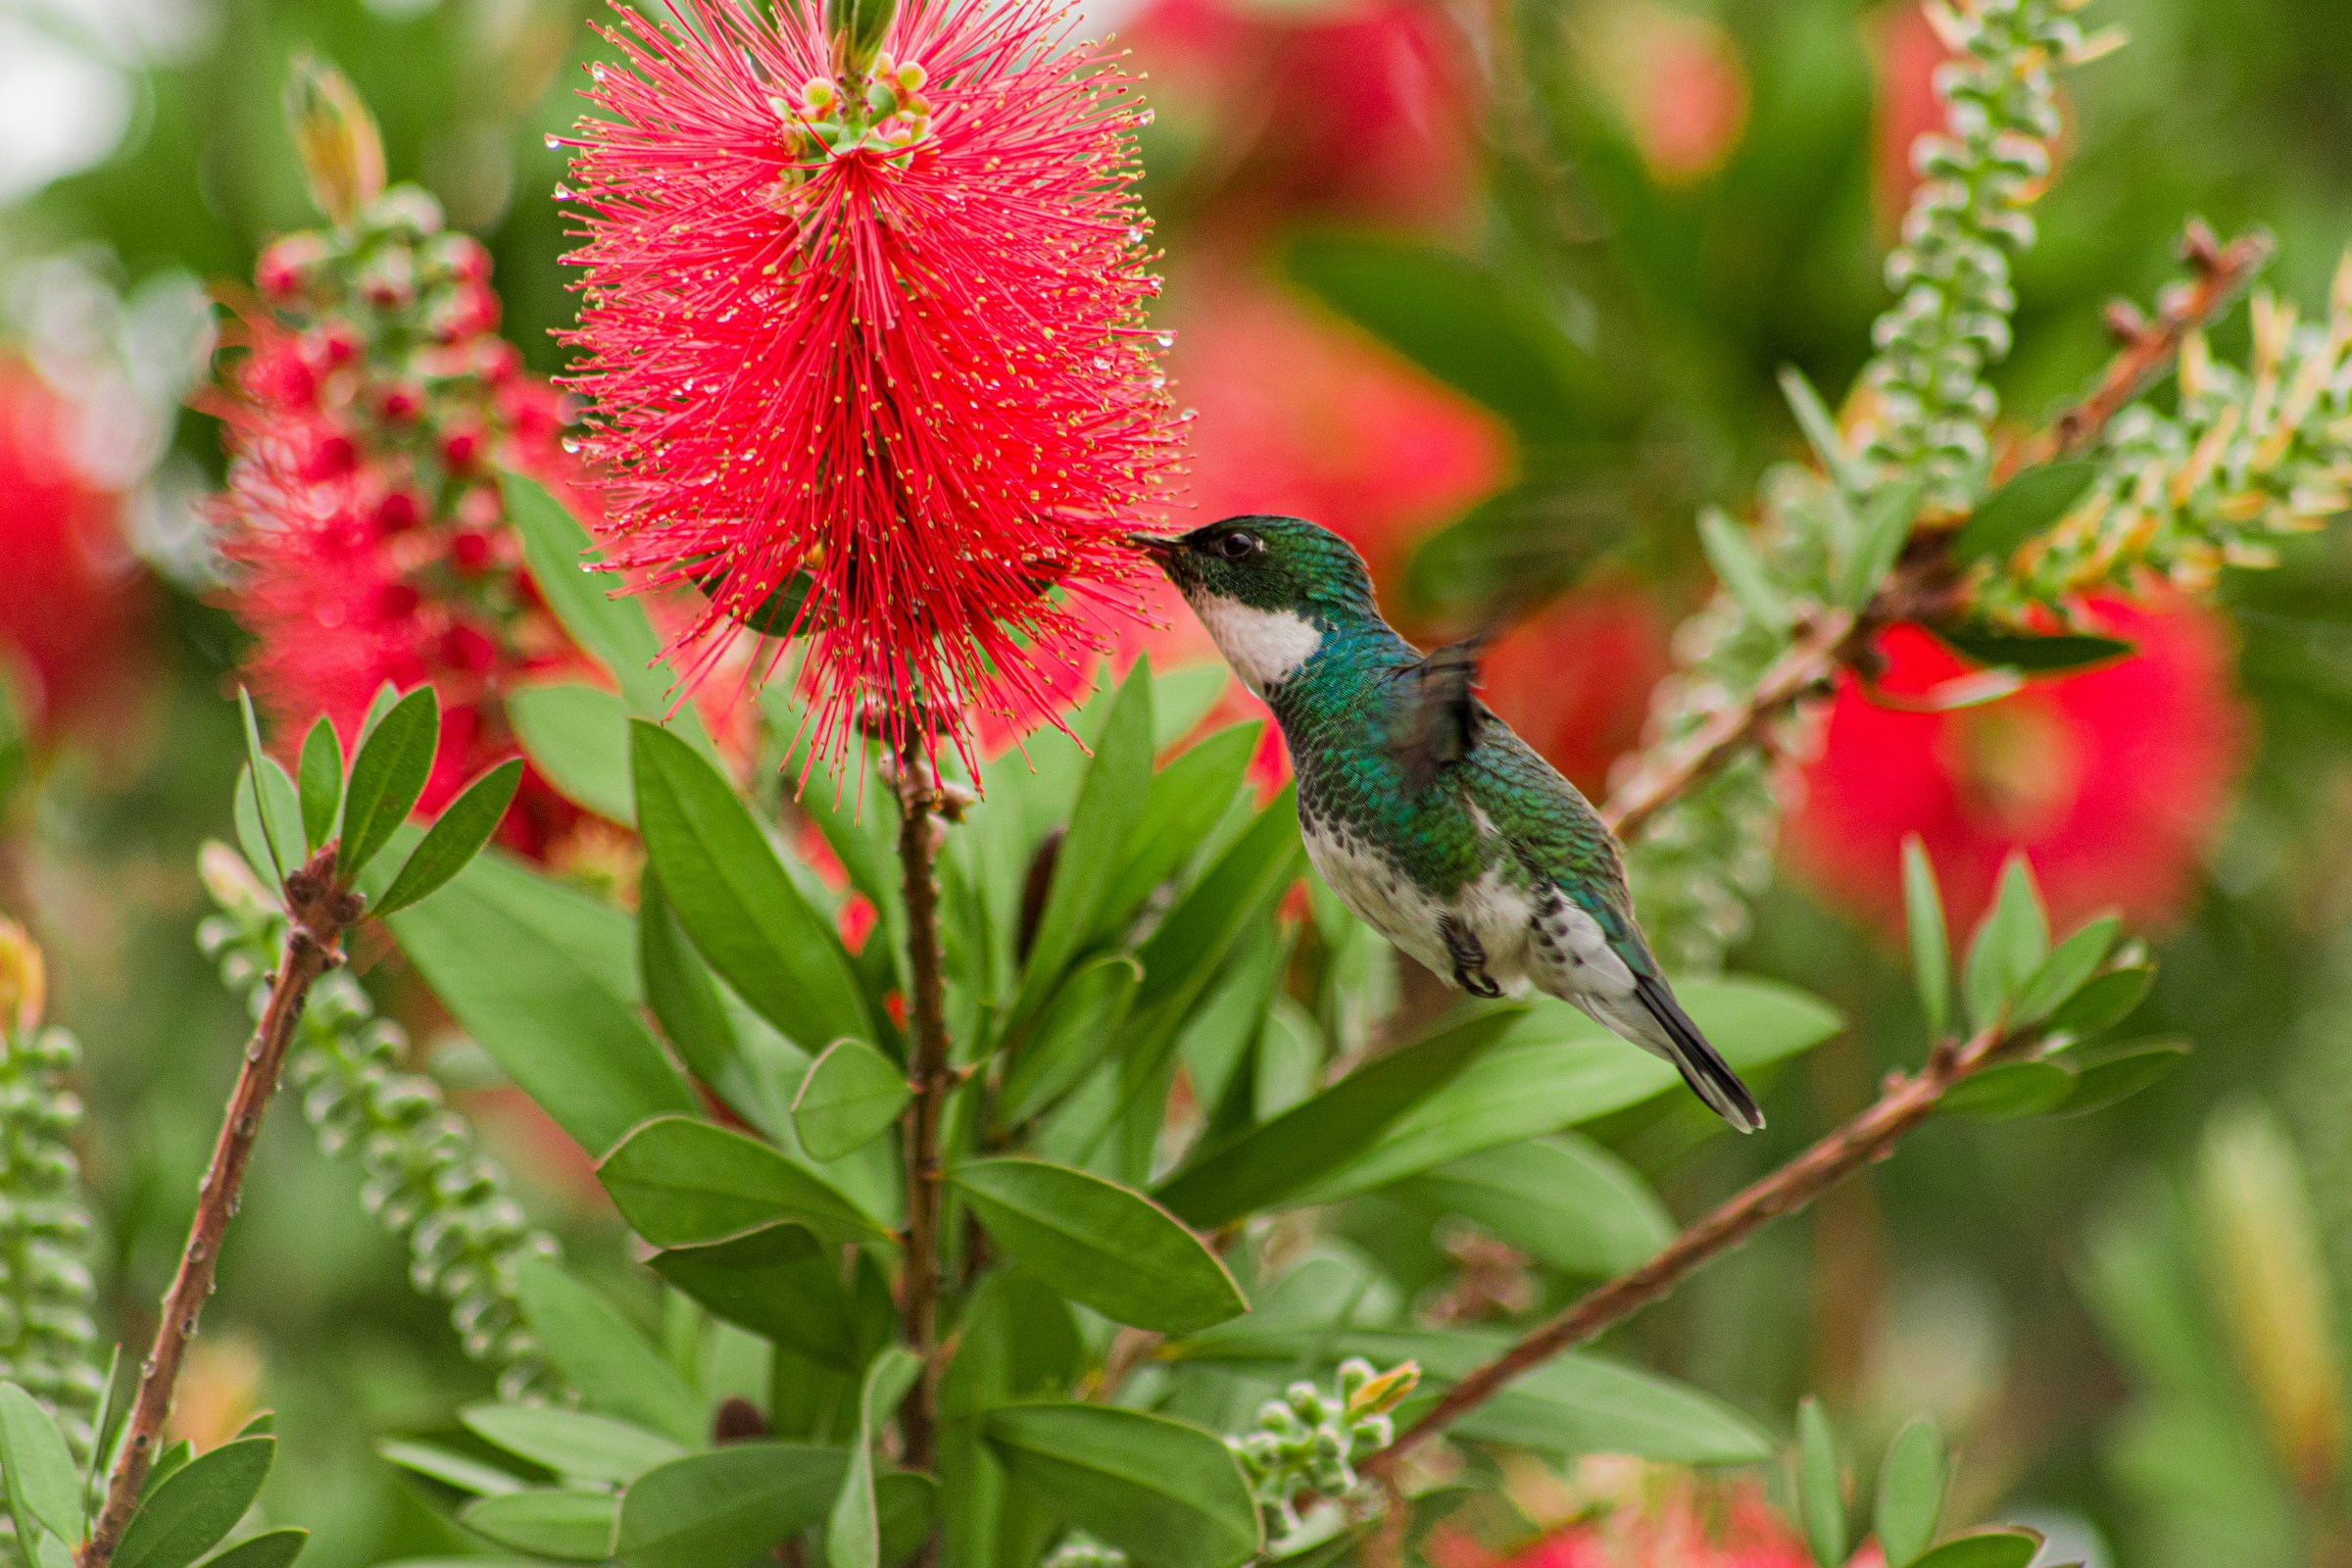 Bird and Flowers Wallpaper for Laptop and Phone 4k 2400x1600